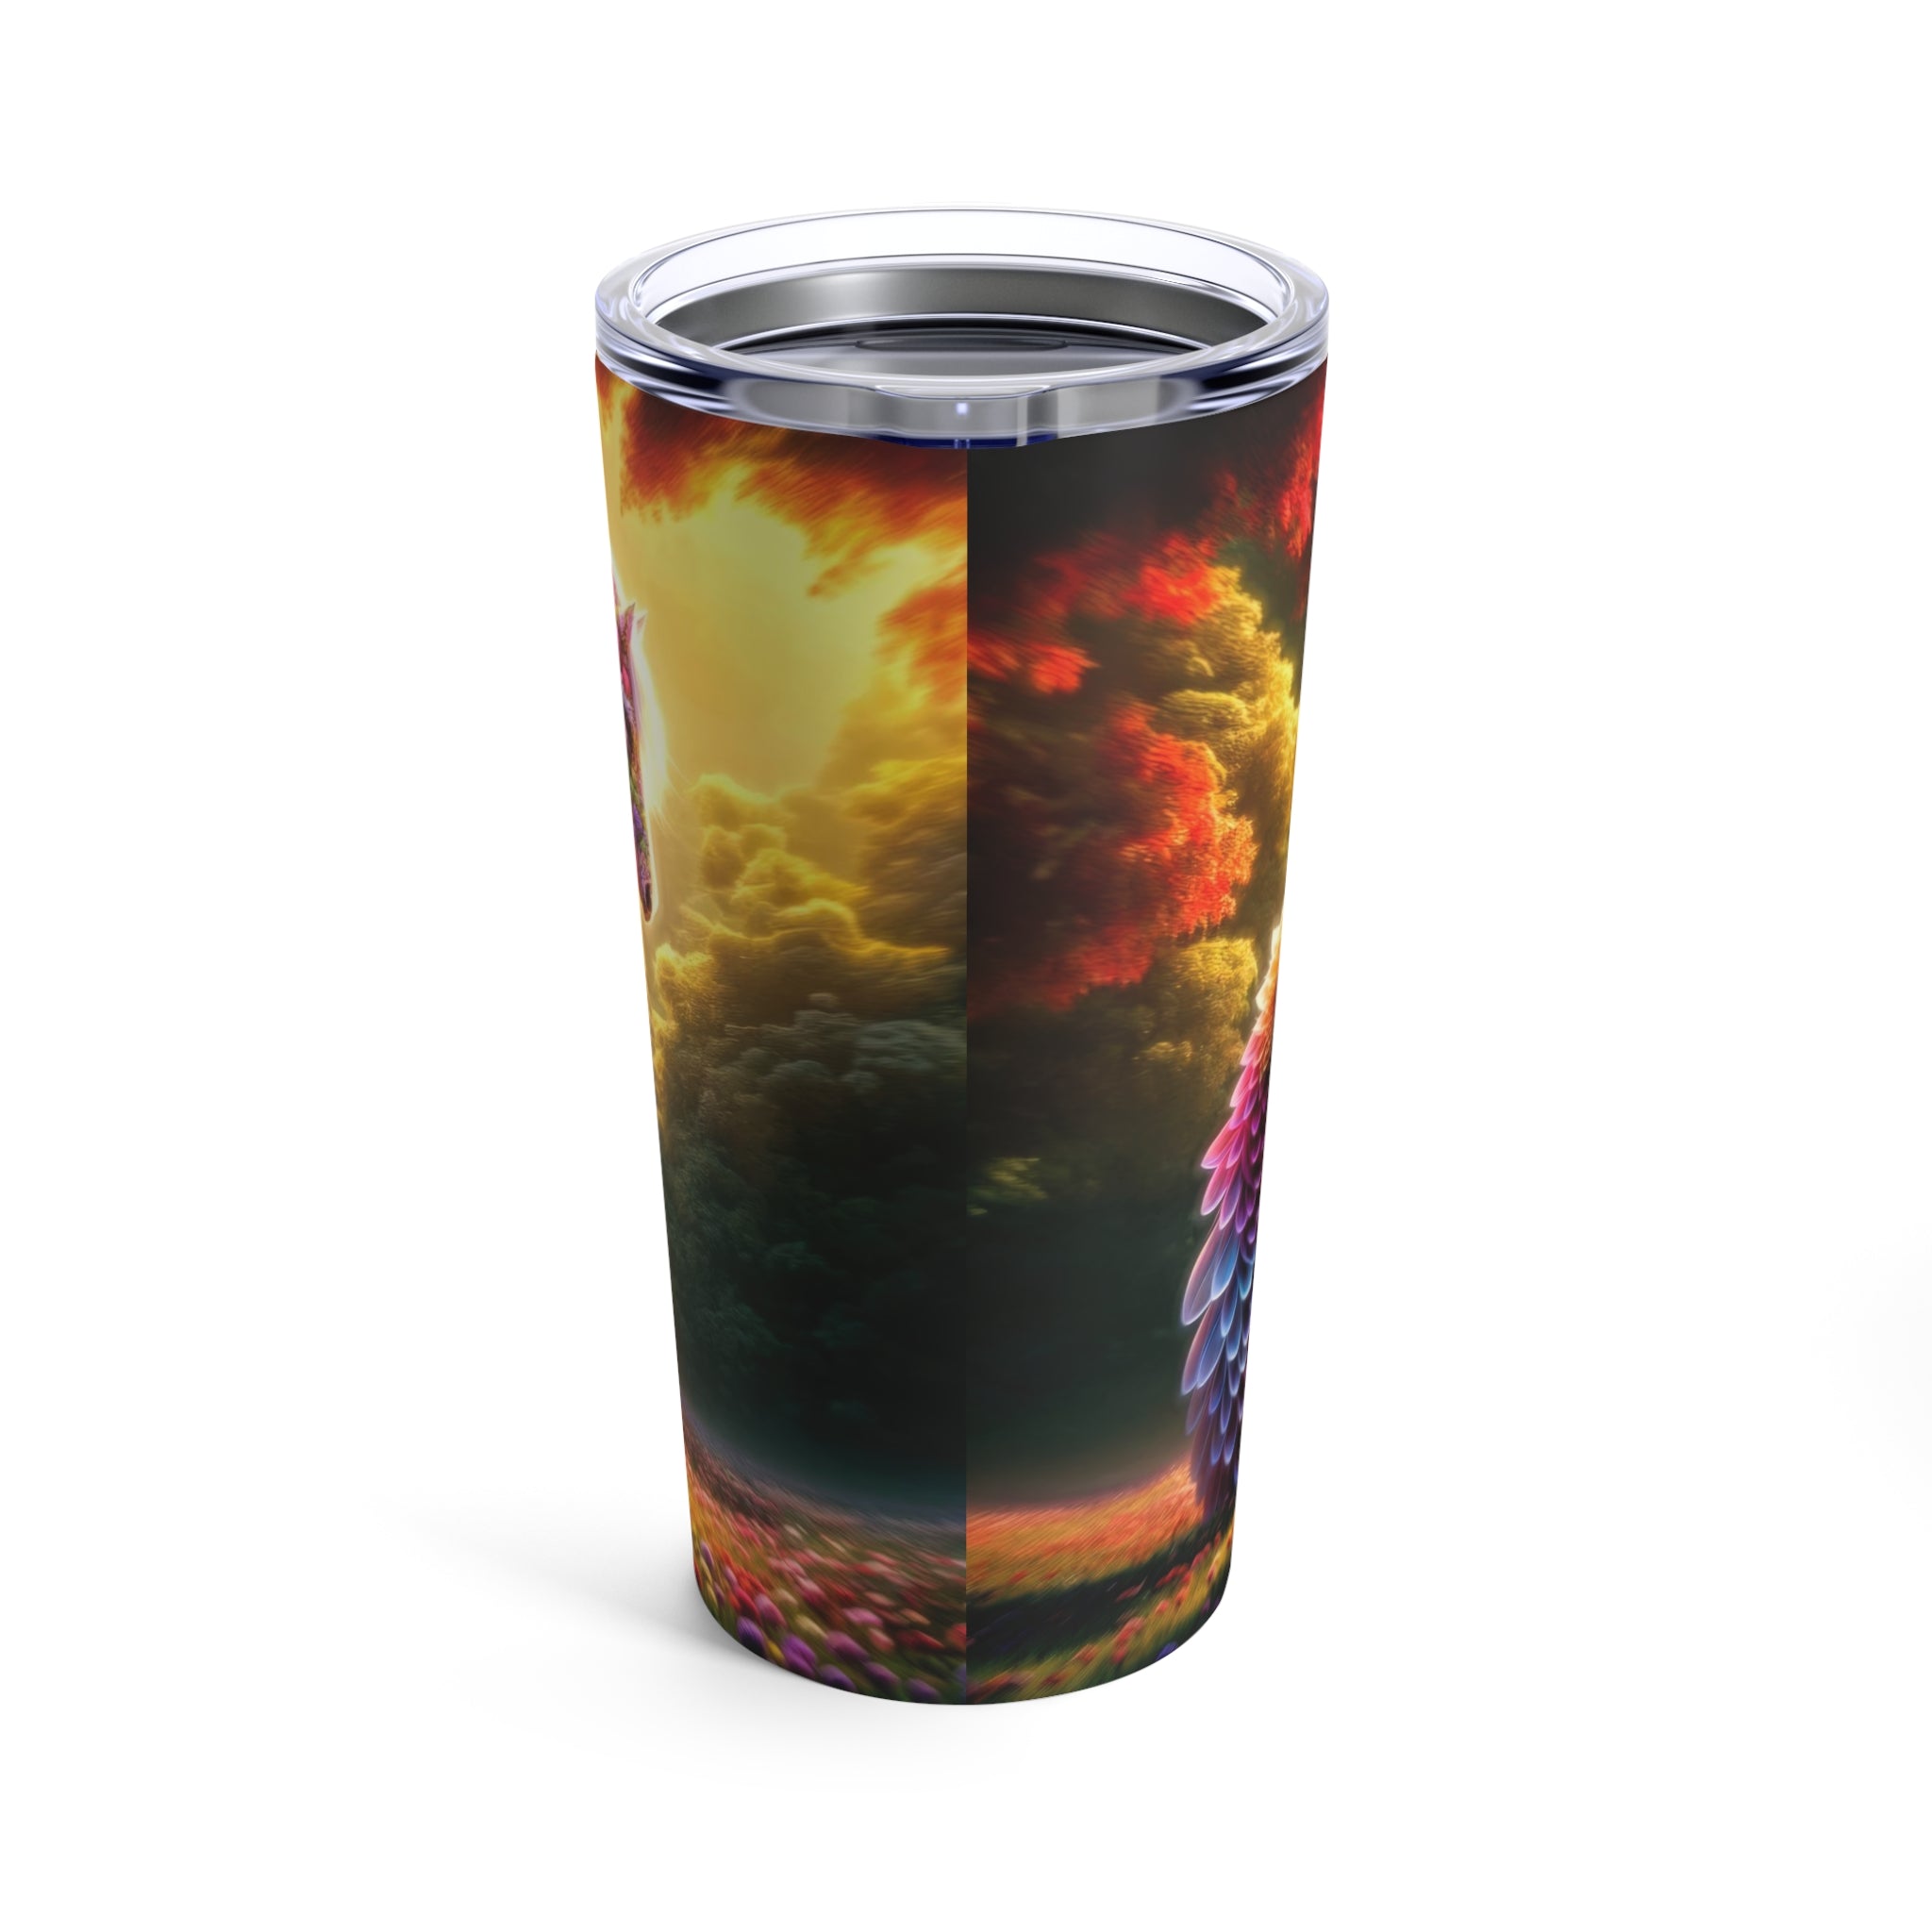 Bouquet with Hooves Tumbler 20oz